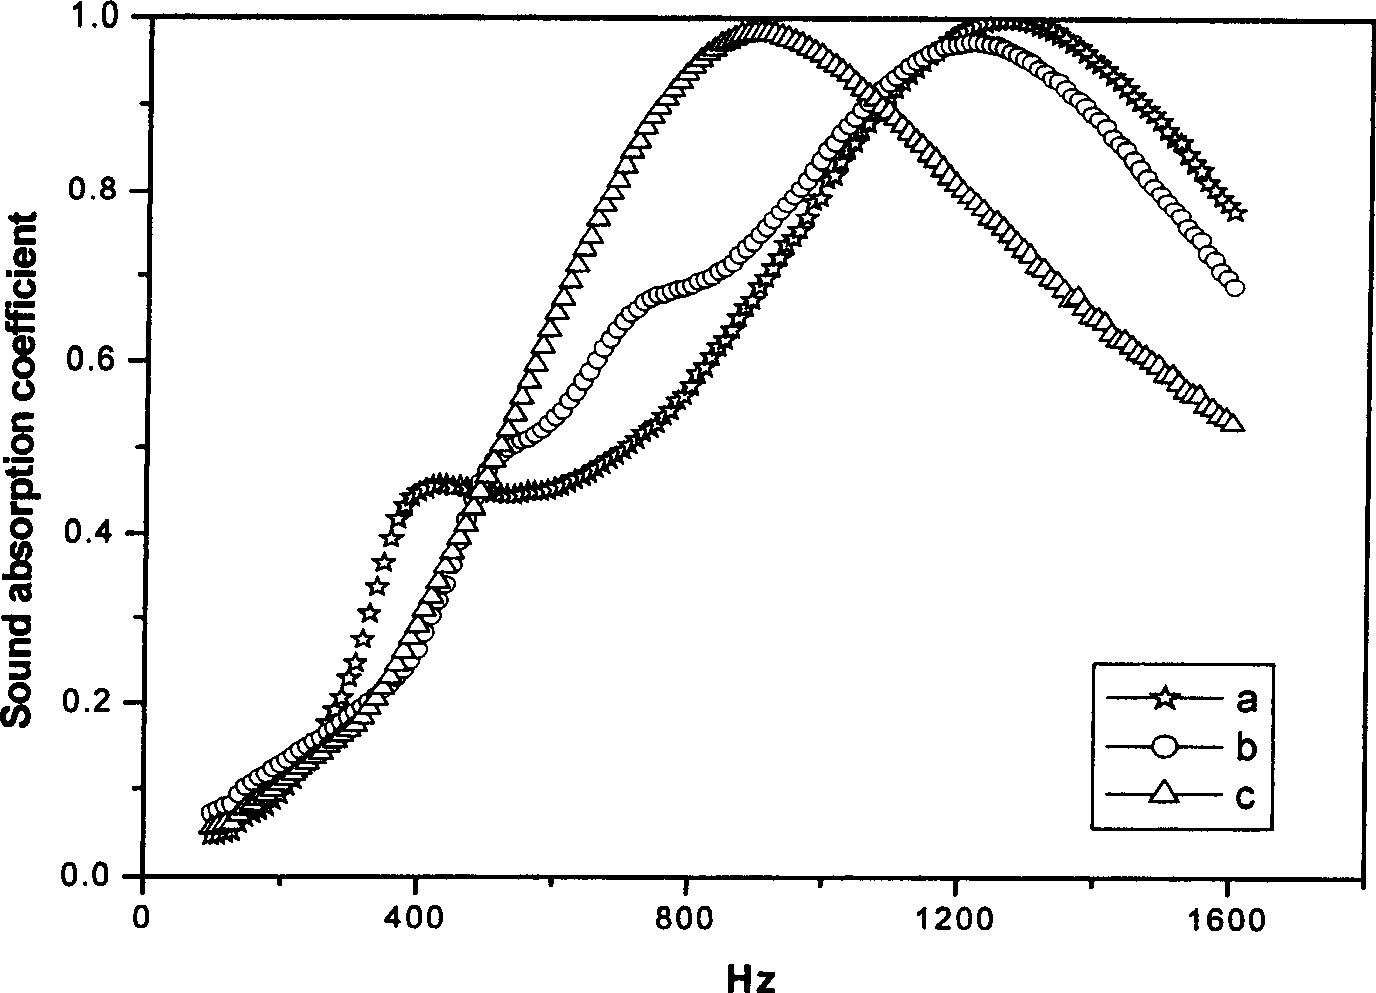 High molecular particle composite sound absorbing material, its mfg. method and uses